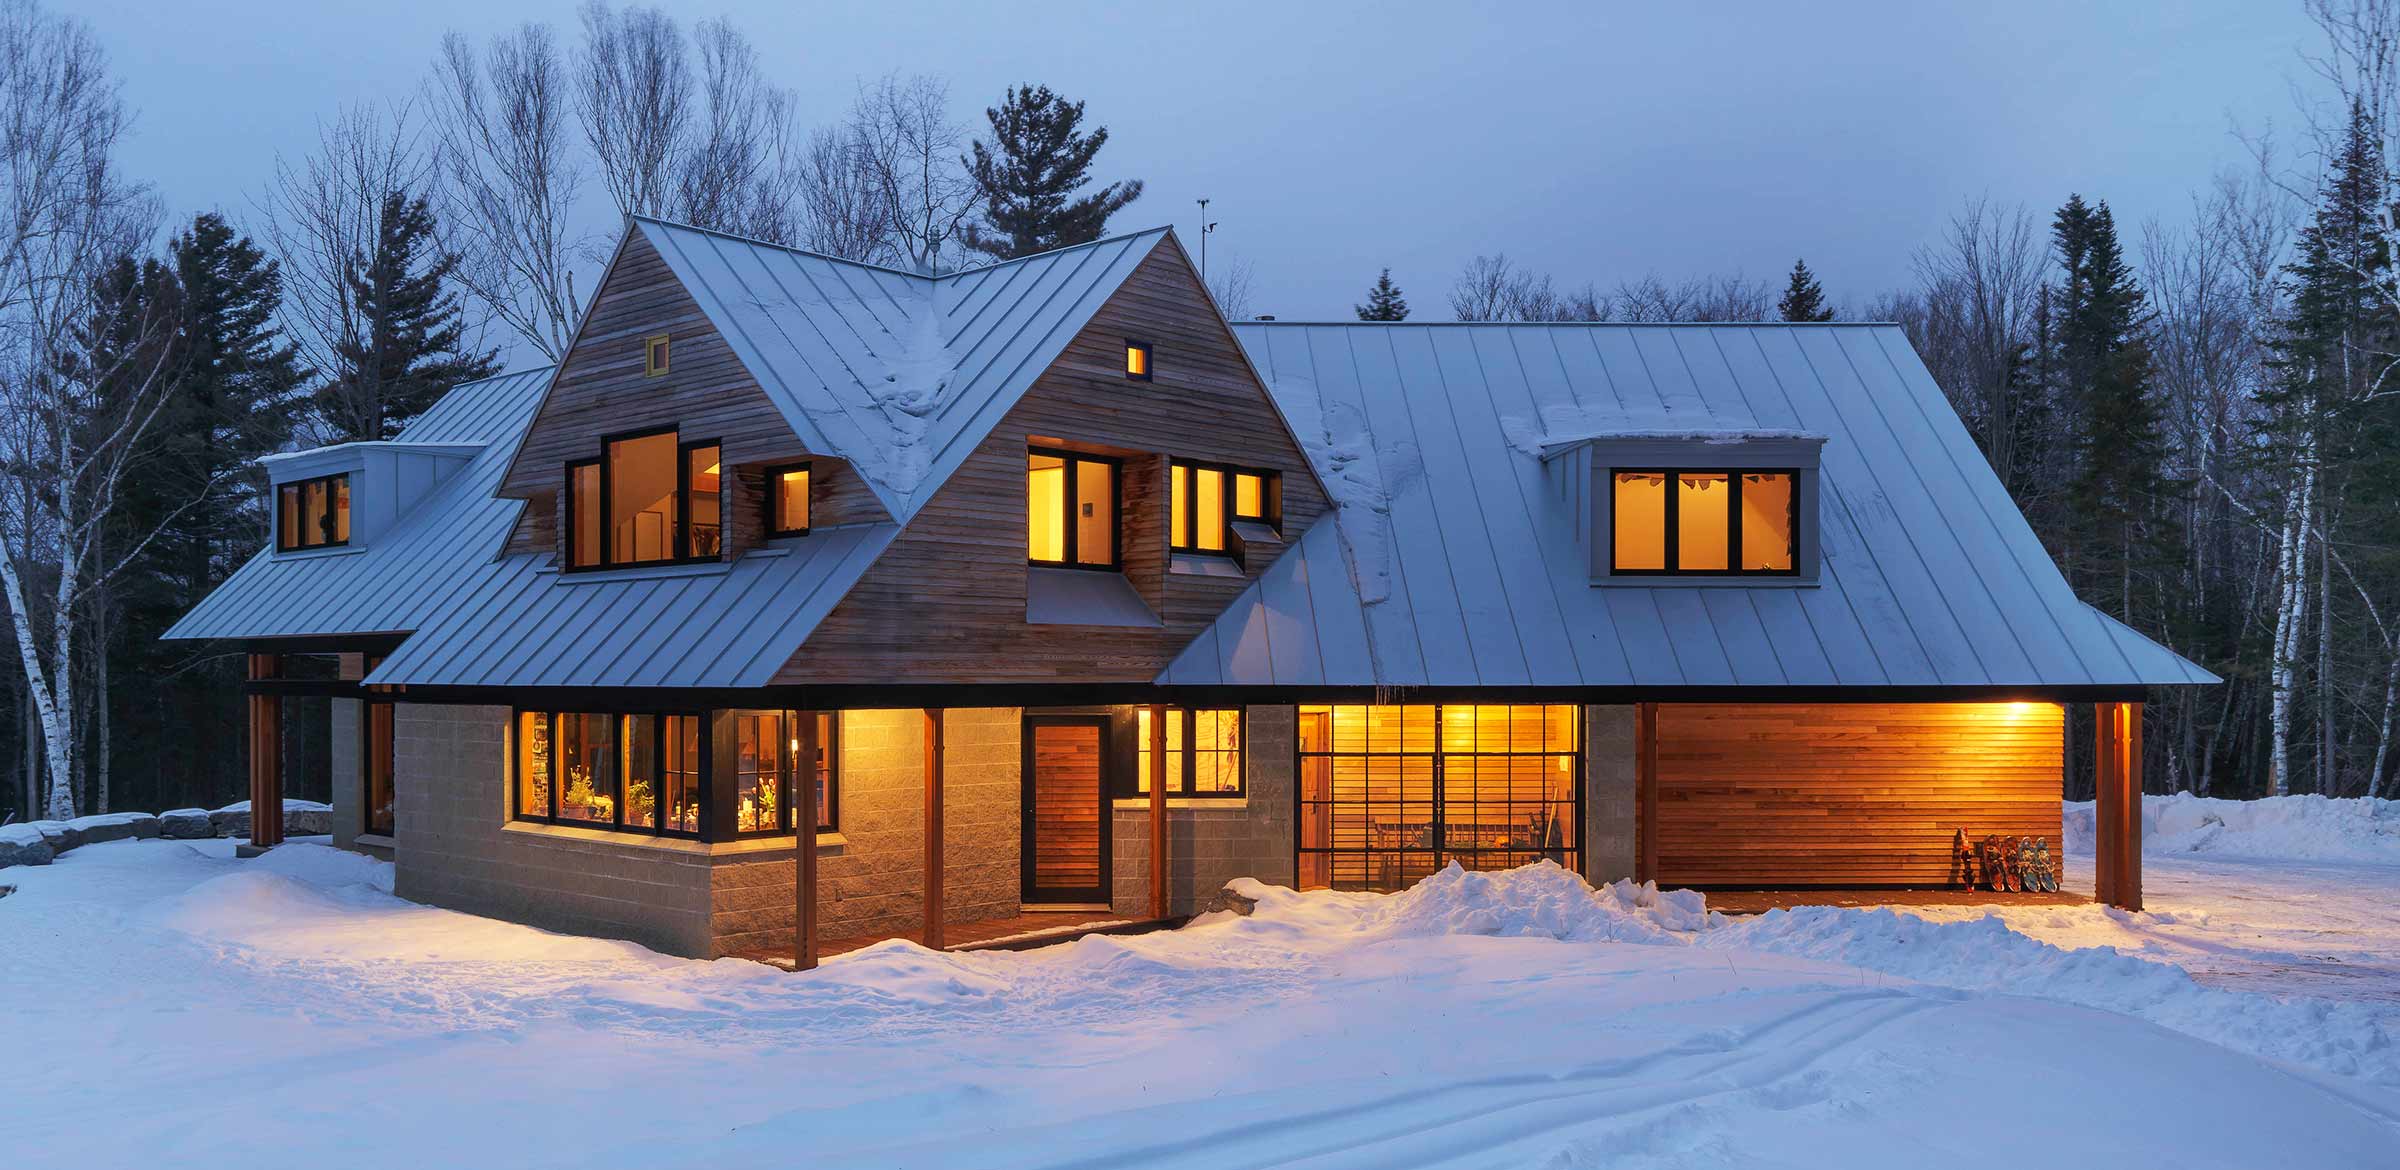 the house in the winter with warm lights and standing seam roof